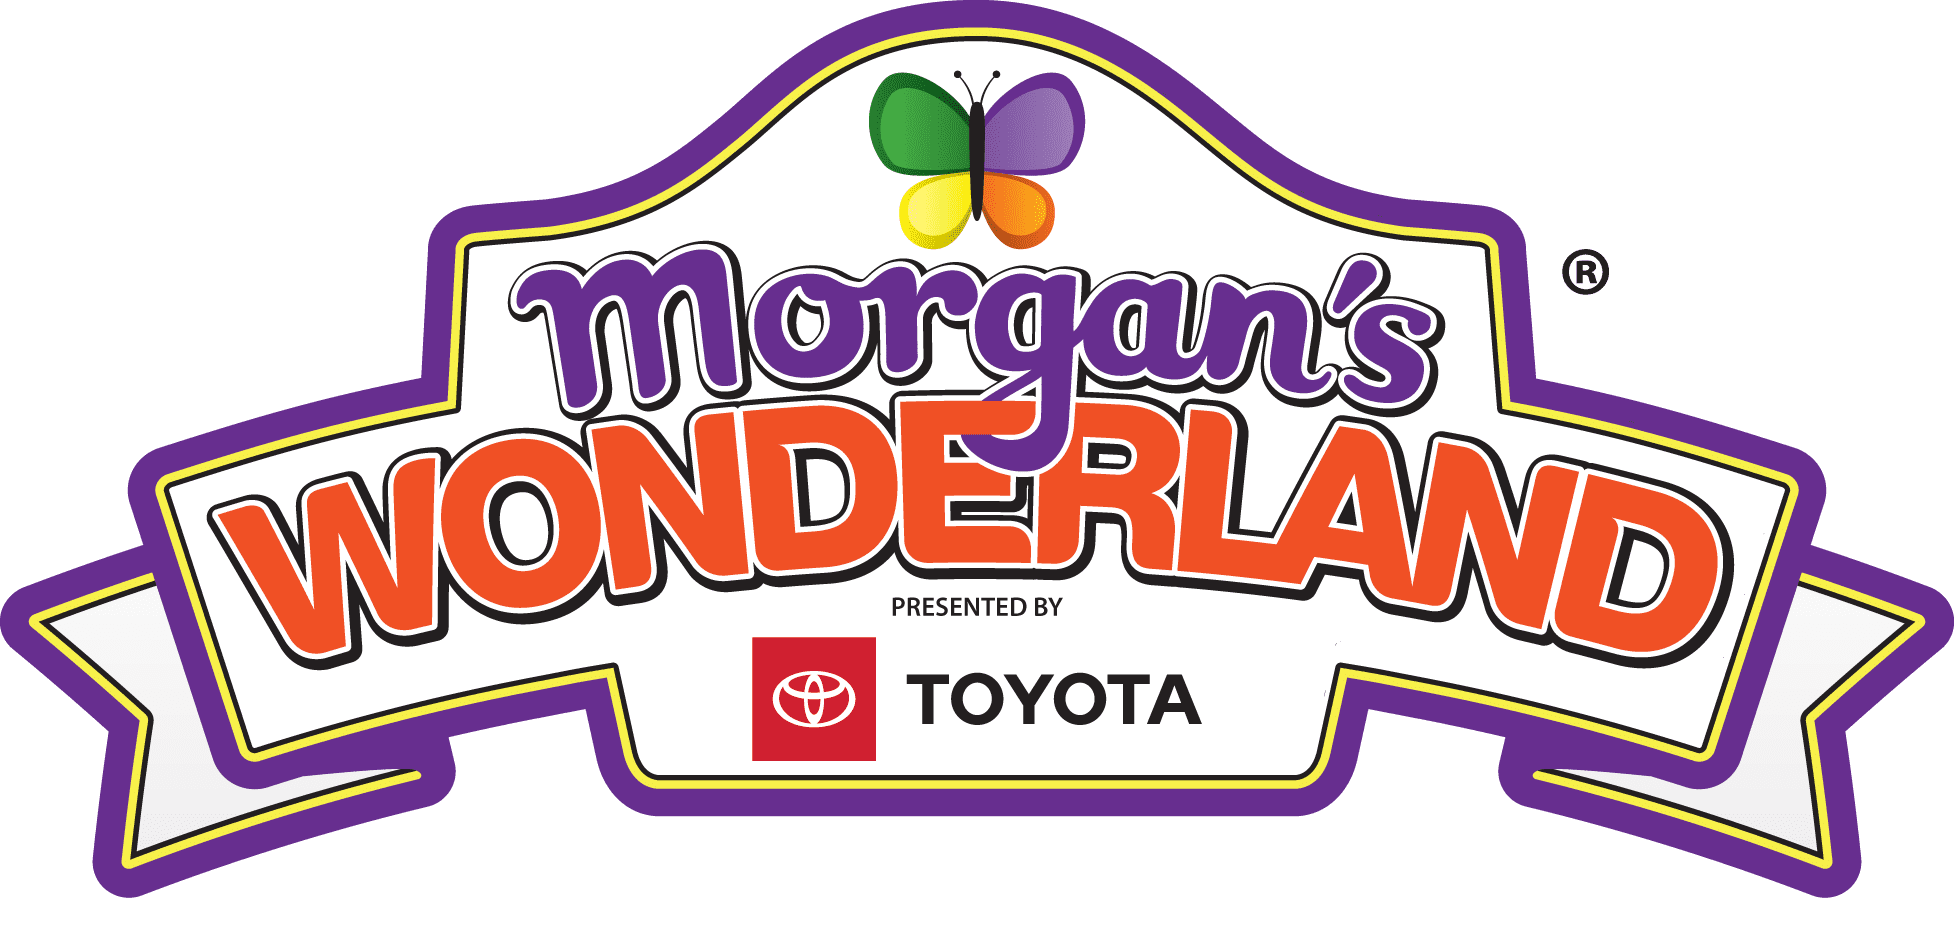 Wonderland The World's First UltraAccessible™ Theme Park